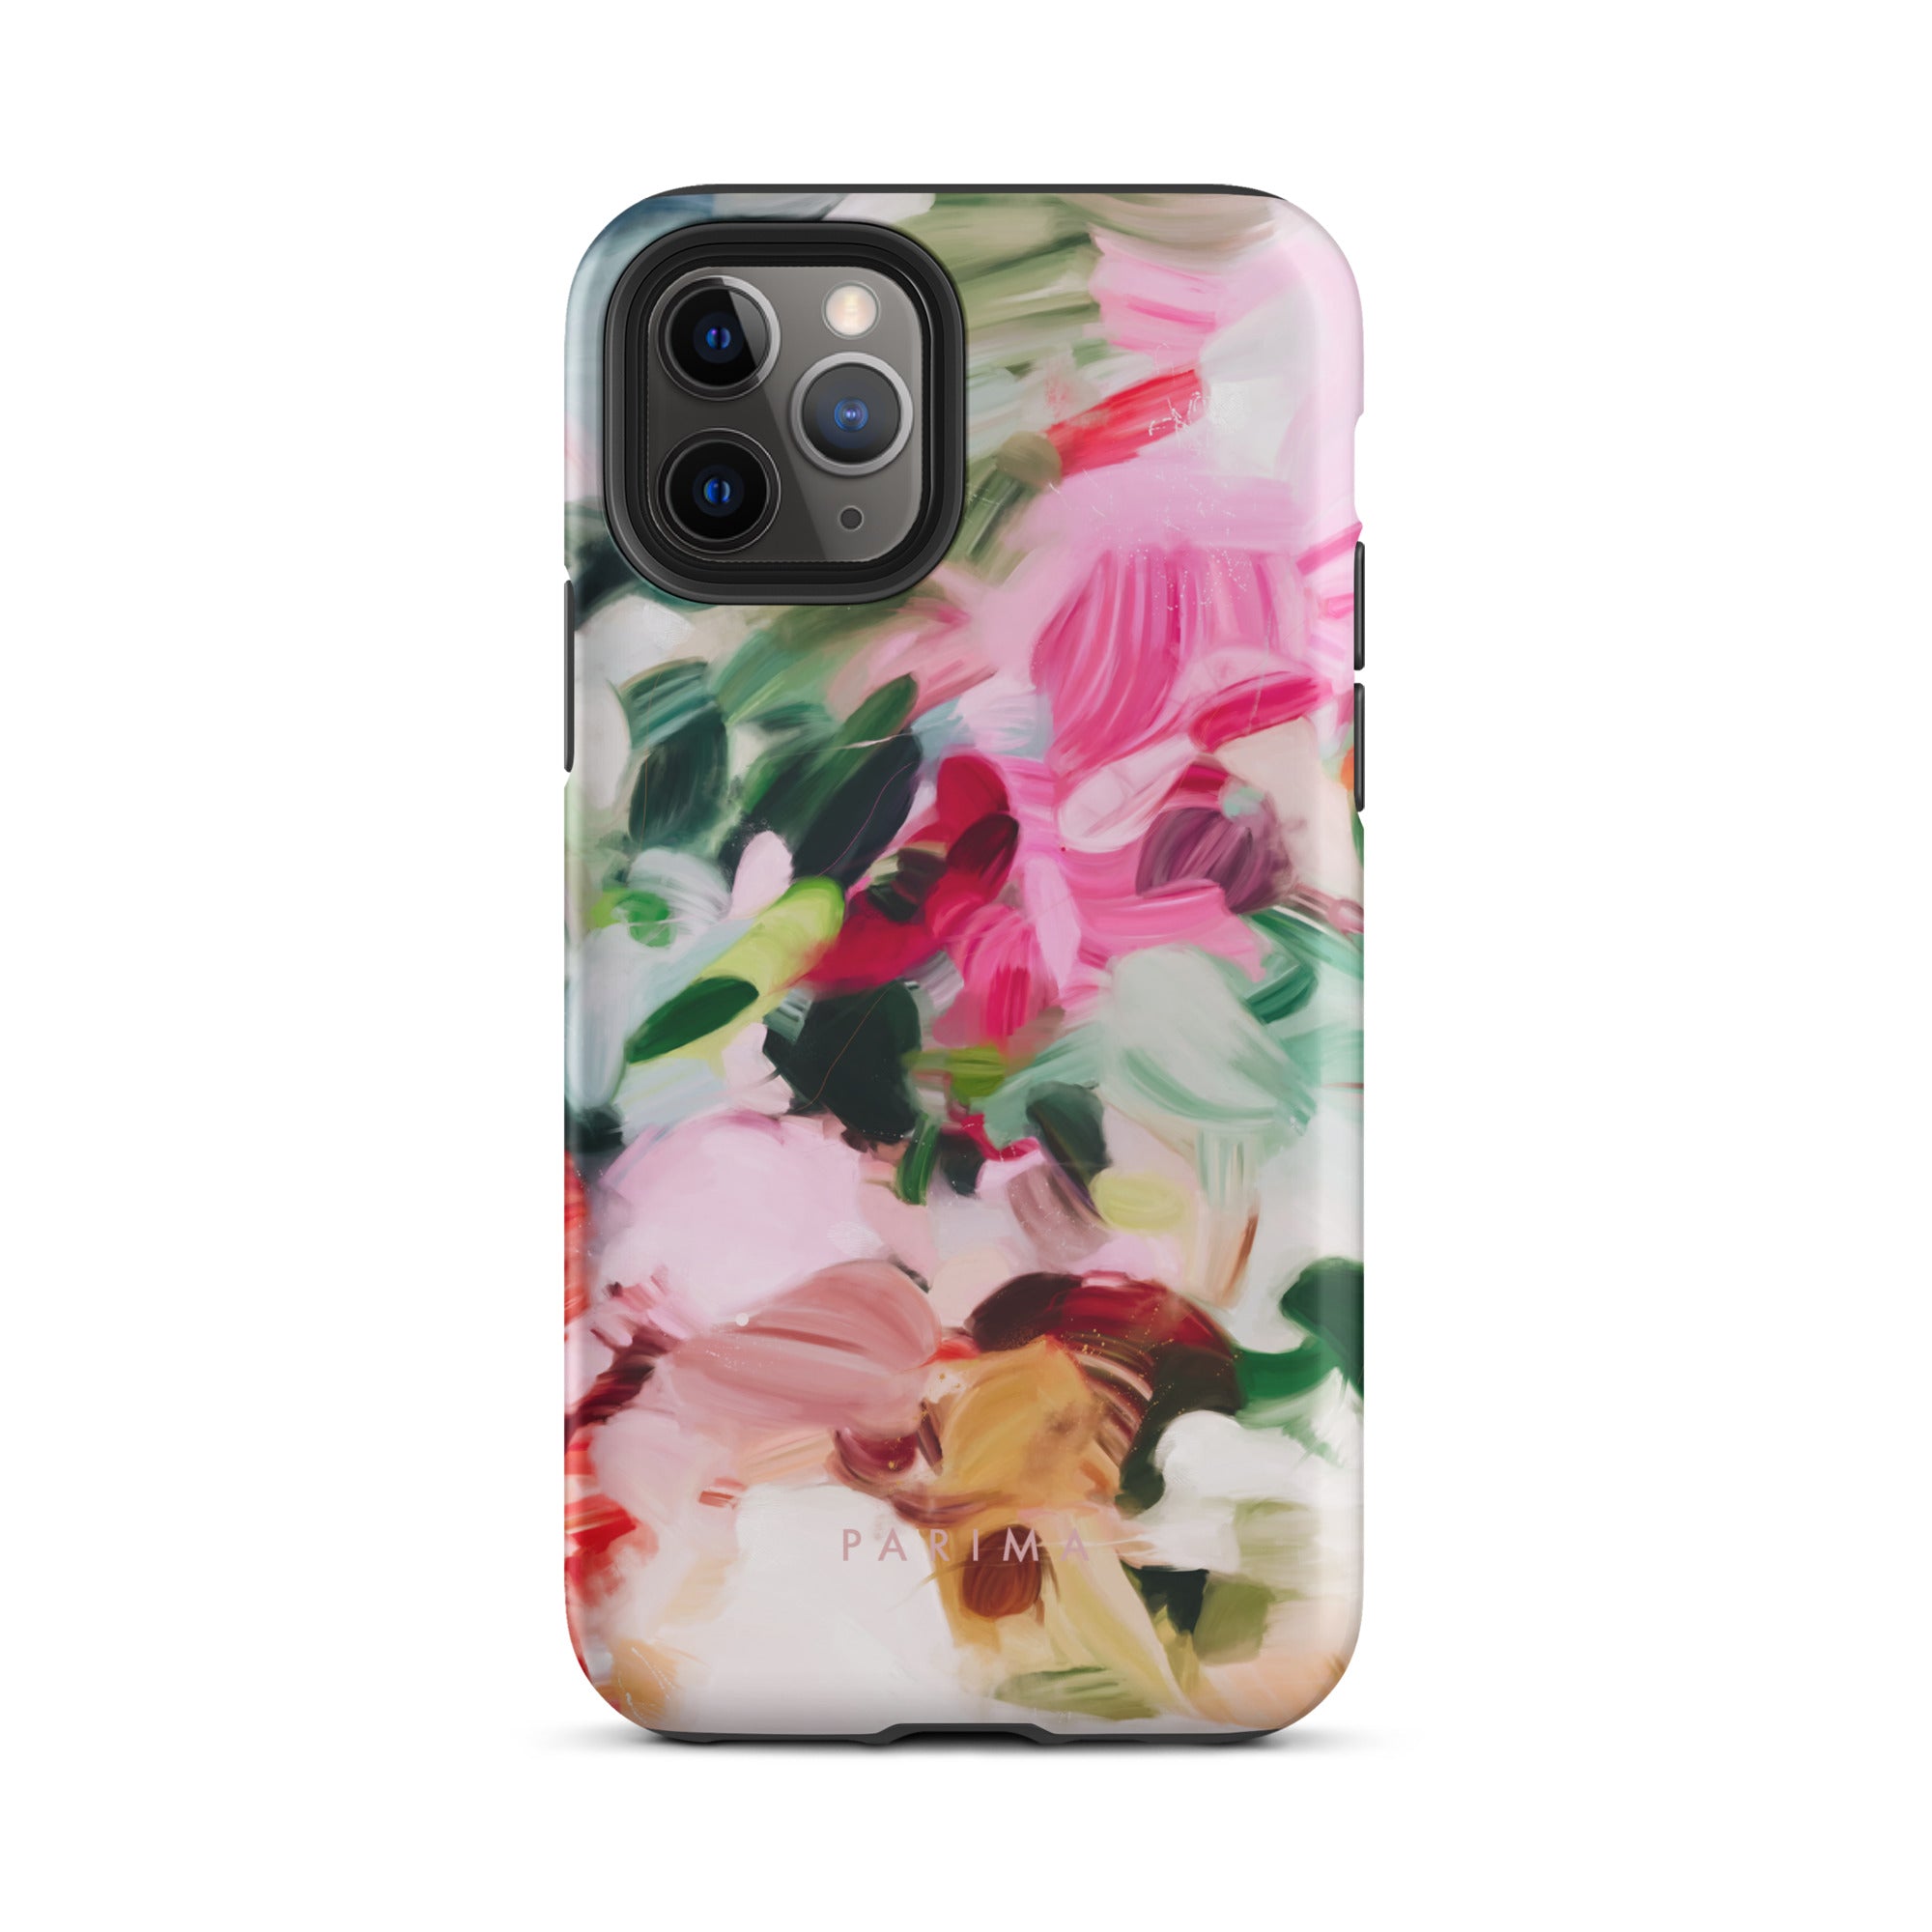 Bloom, pink and green abstract art - iPhone 11 Pro tough case by Parima Studio